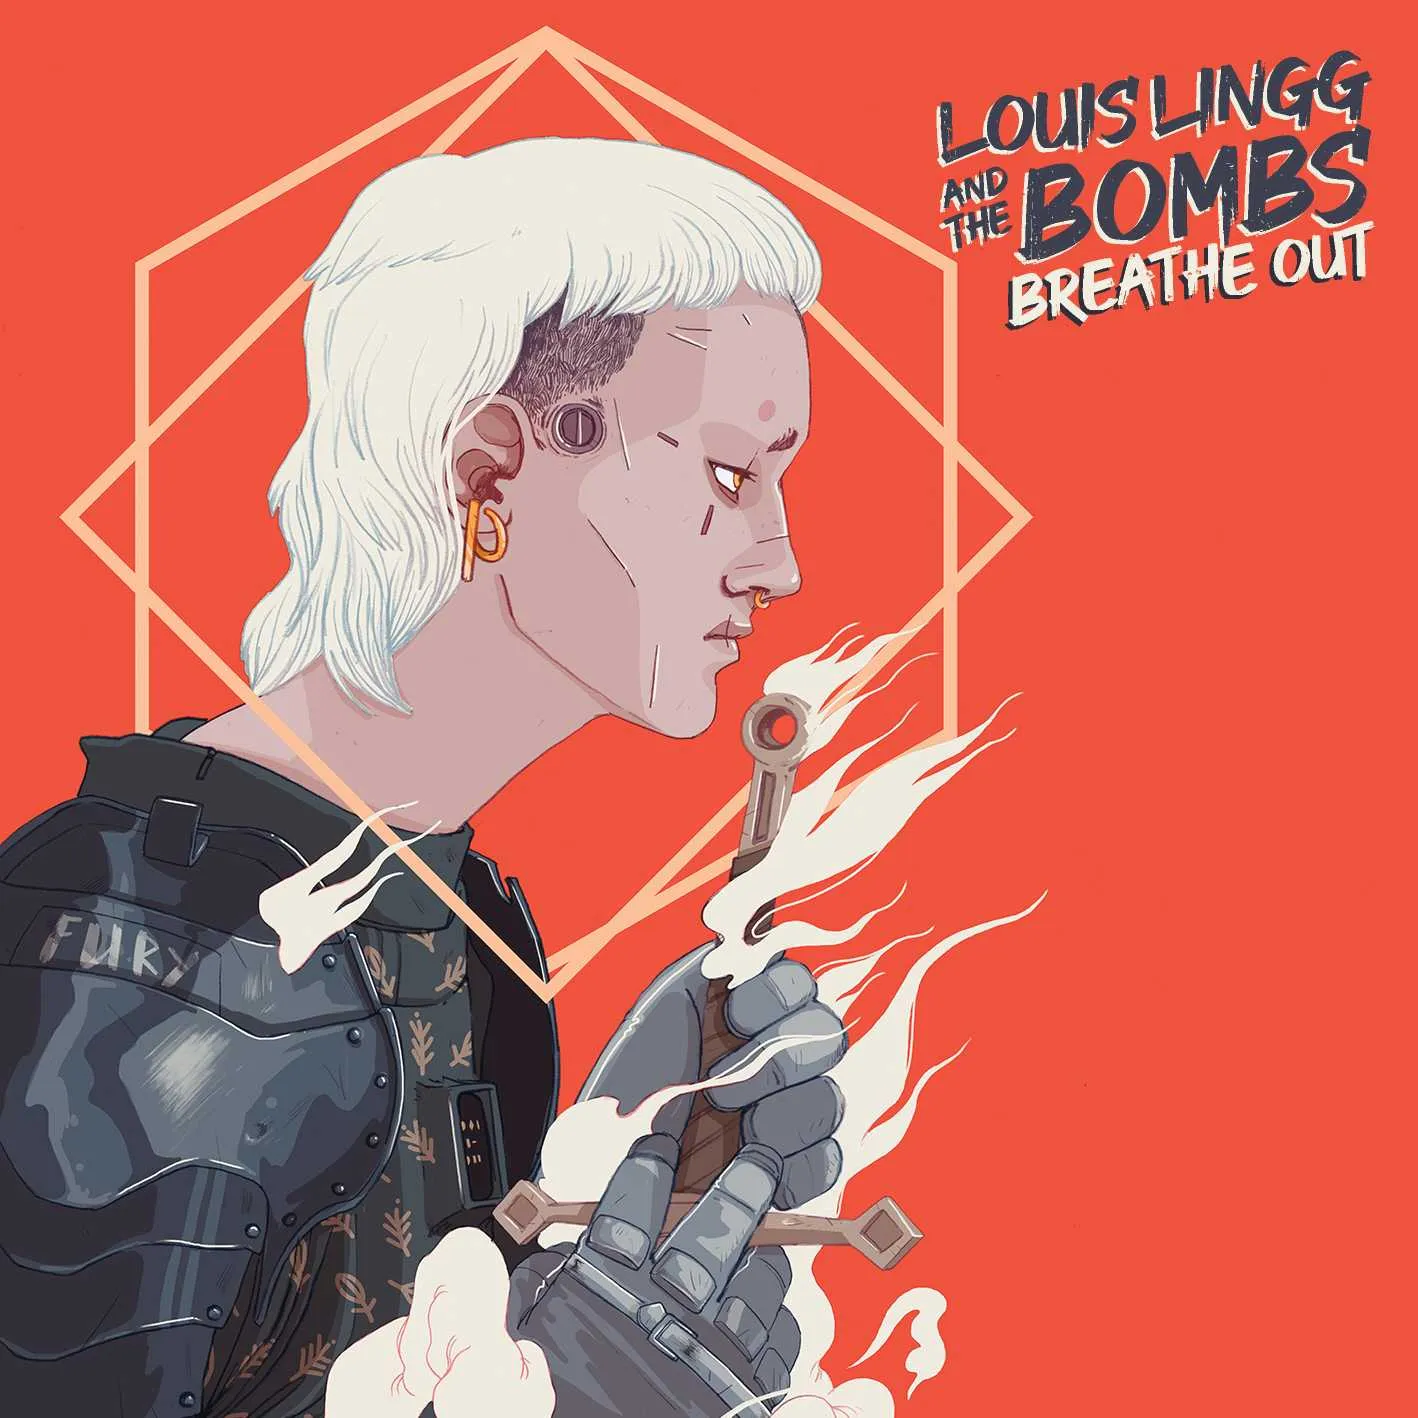 Album cover for “Breathe Out” by Louis Lingg and The Bombs